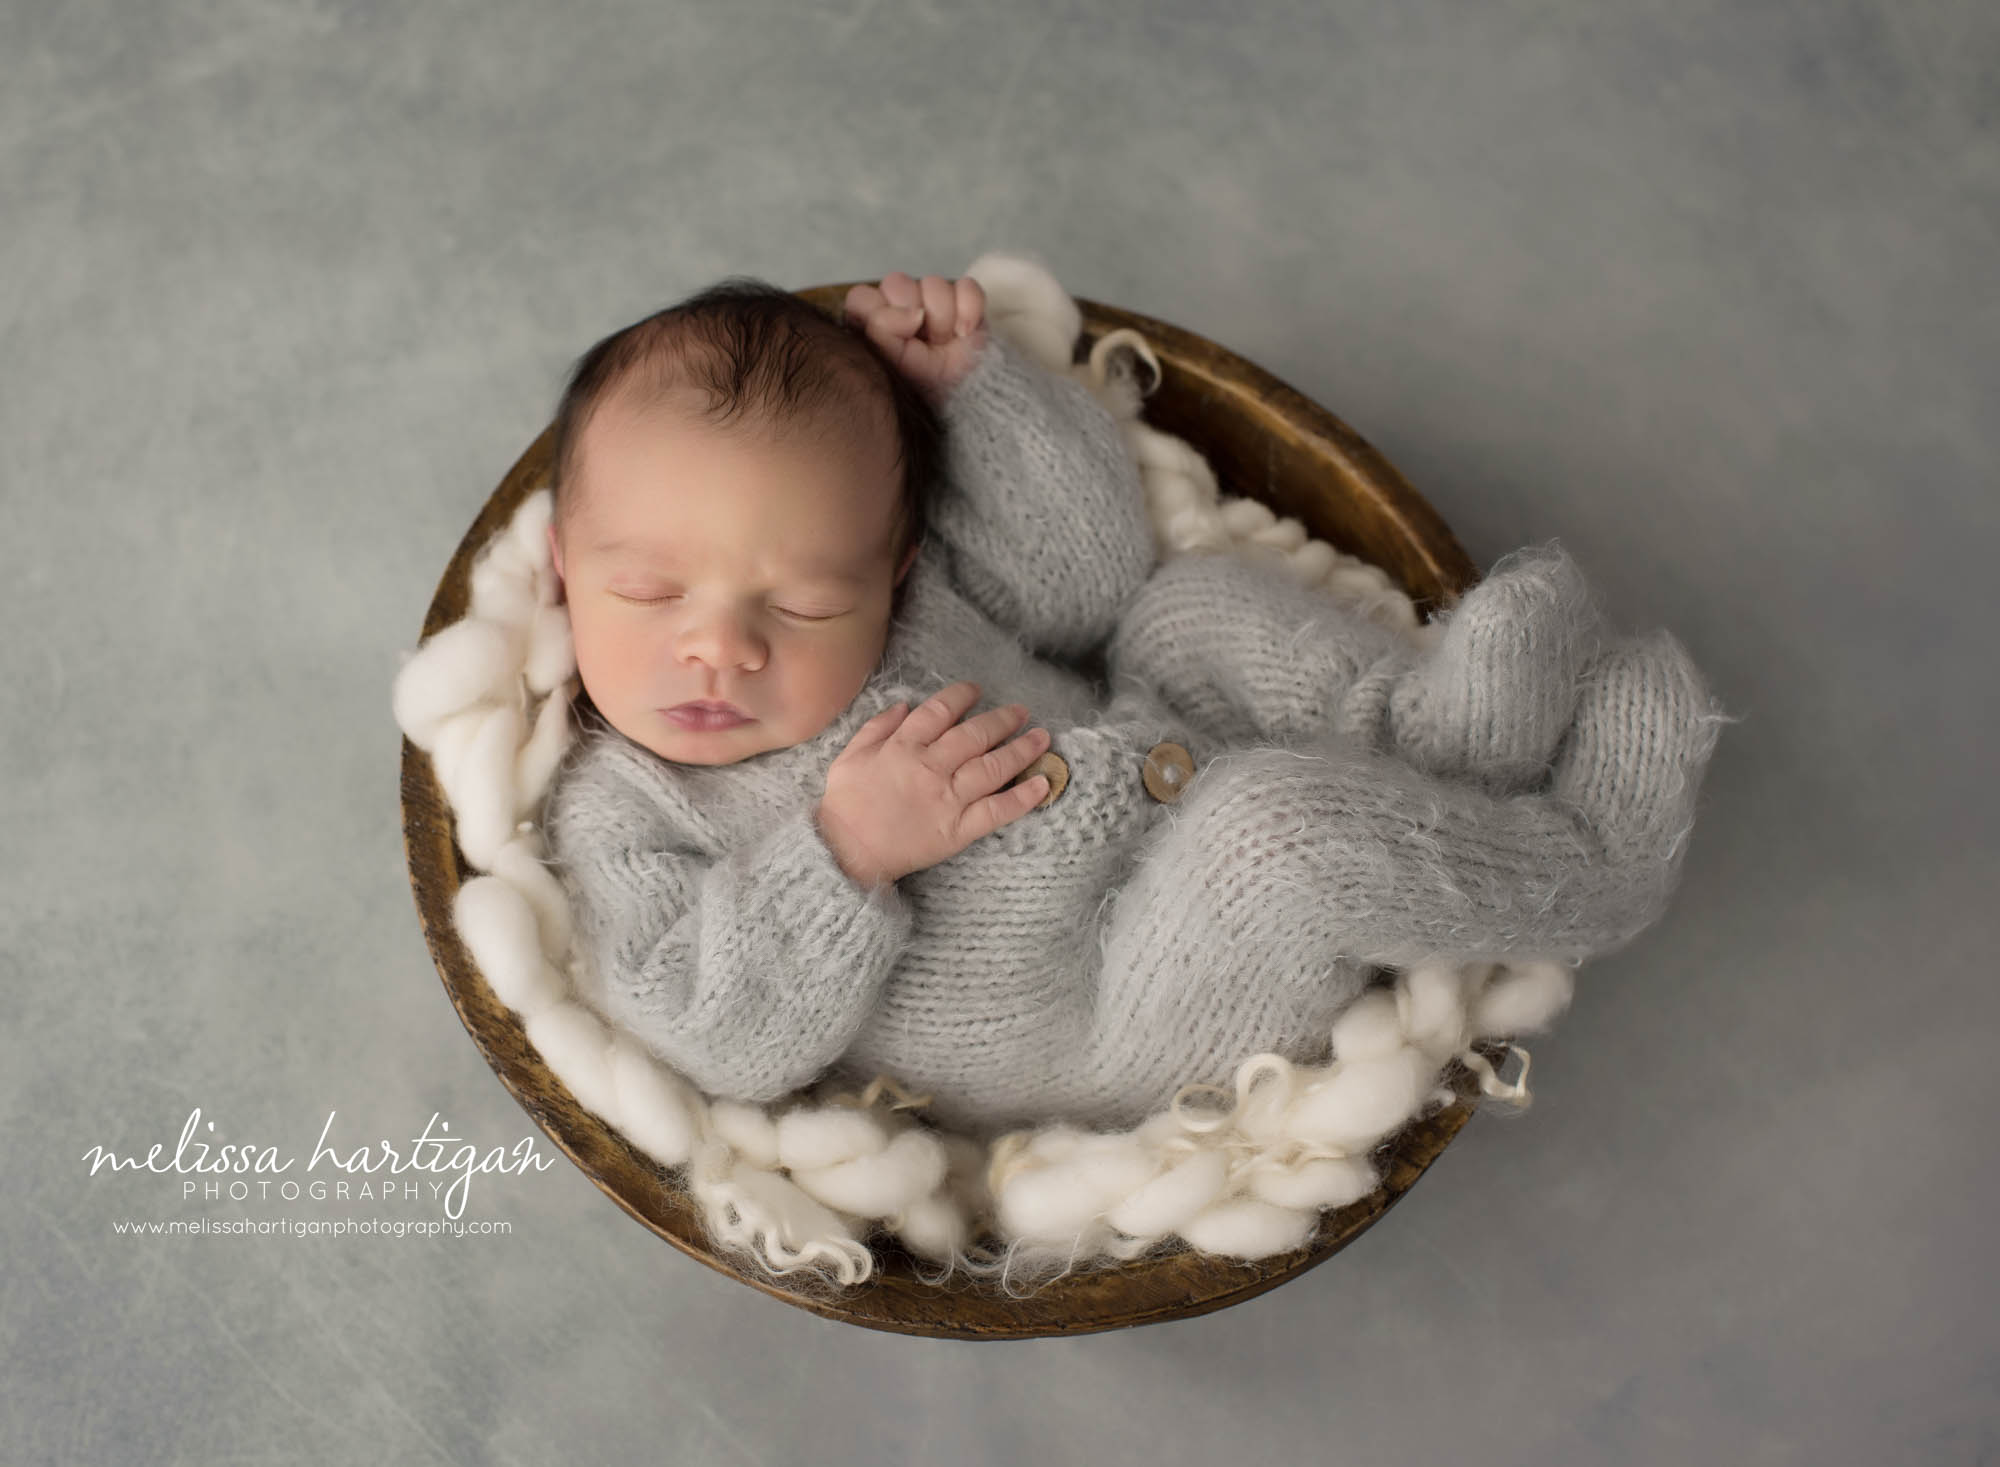 newborn baby boy wearing gray knitted footed newborn romper posed in wooden bowl sleeping peacefully North Haven CT baby photography